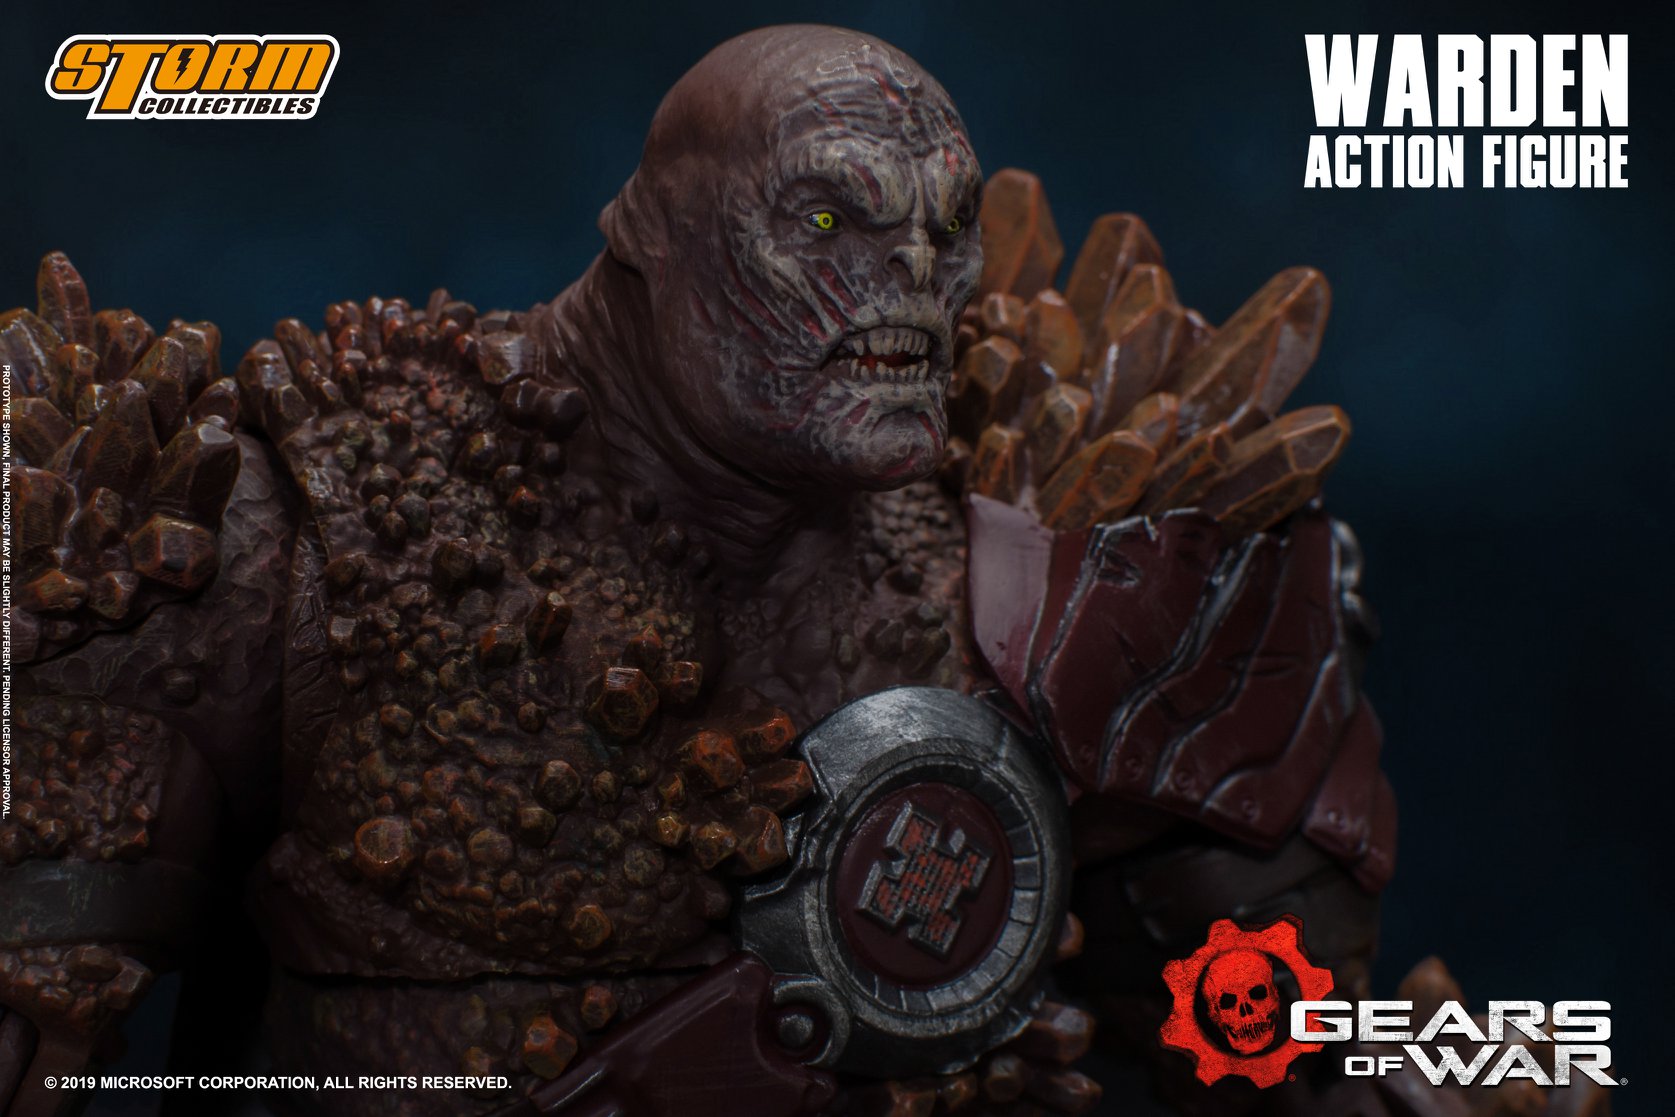 Gears Utility #Gears5 on X: Storm Collectibles have just dropped two new  @GearsofWar figures available for pre-order! 🔥 The only question is If  you could only have one, which would you pick